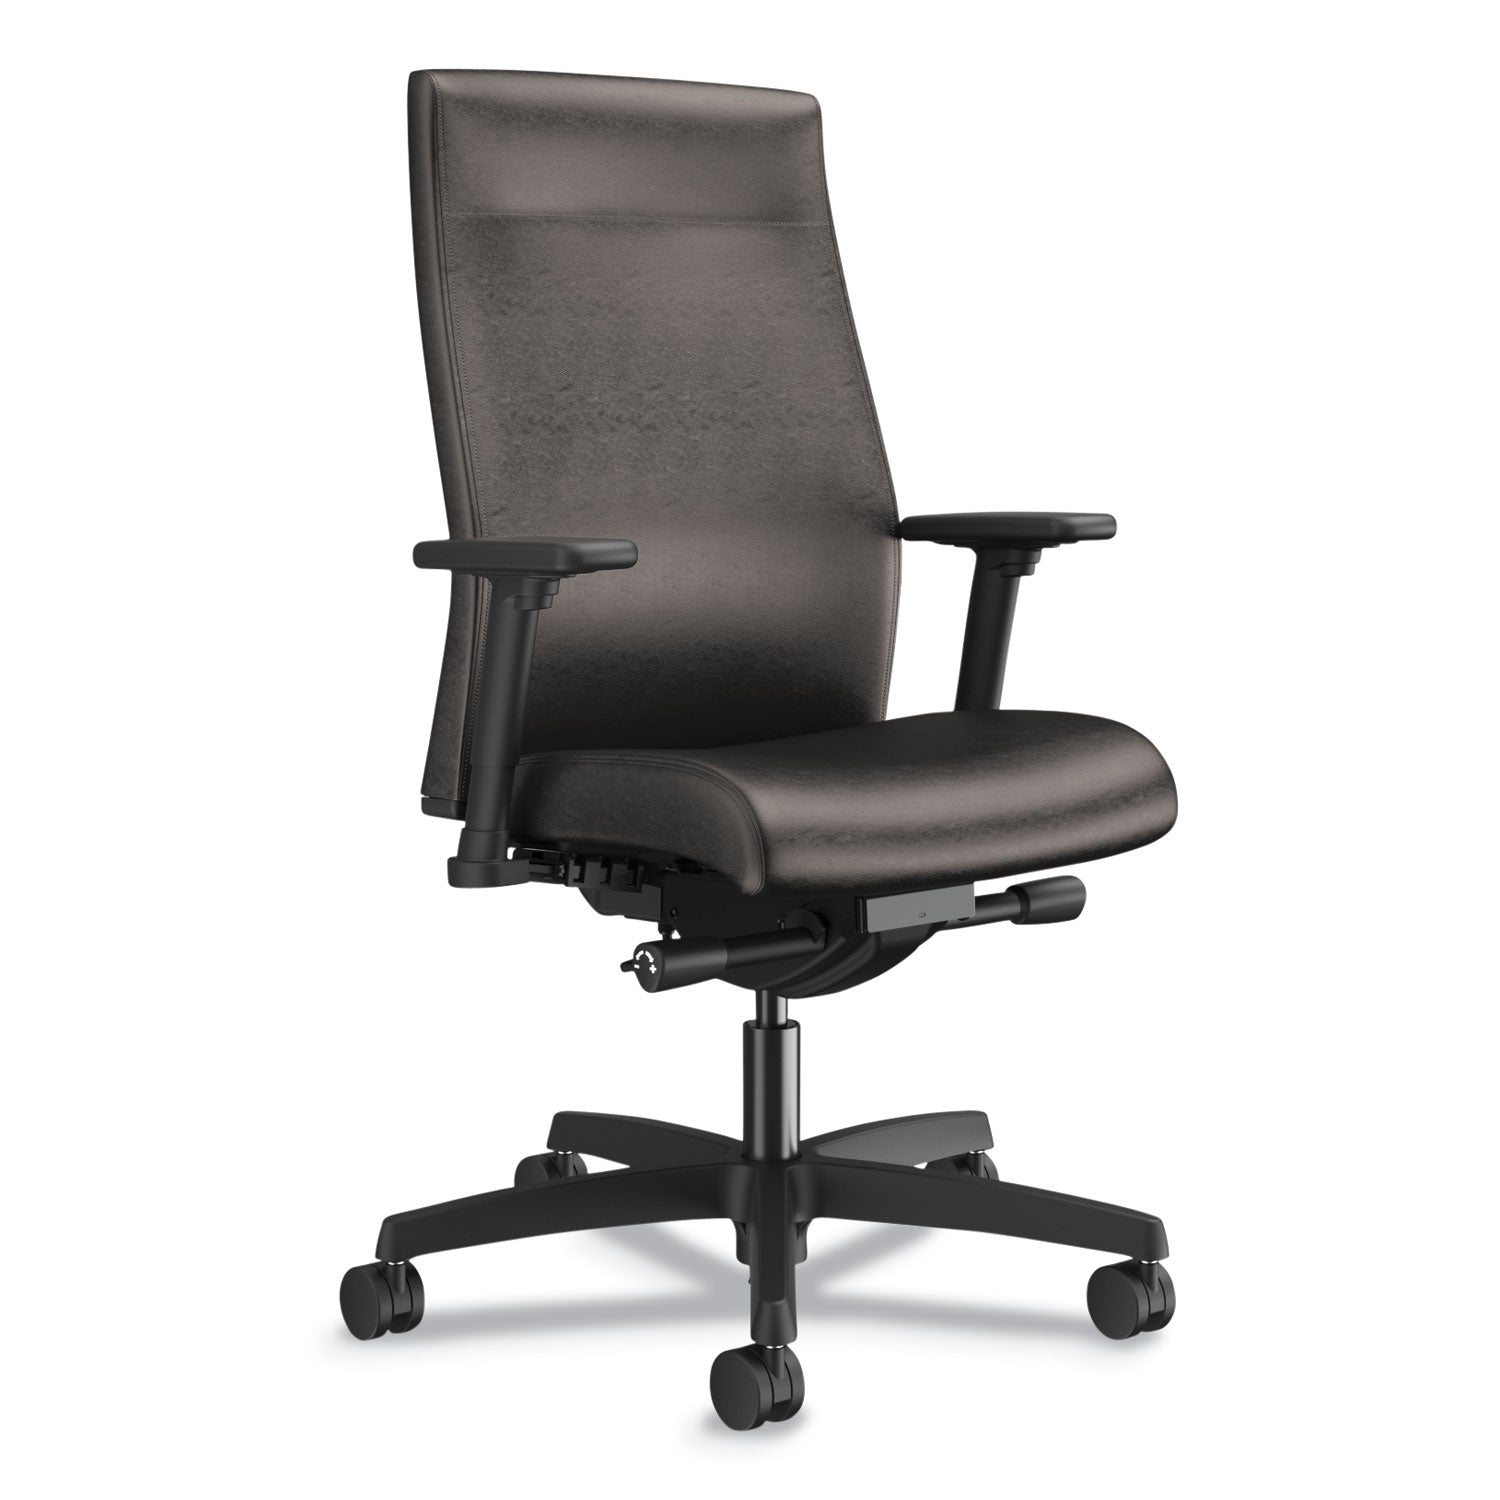 ignition-20-upholstered-mid-back-task-chair-with-lumbar-supports-300-lb-17-to-22-seat-black-vinyl-seat-back-black-base_honi2ul2au10tk - 1